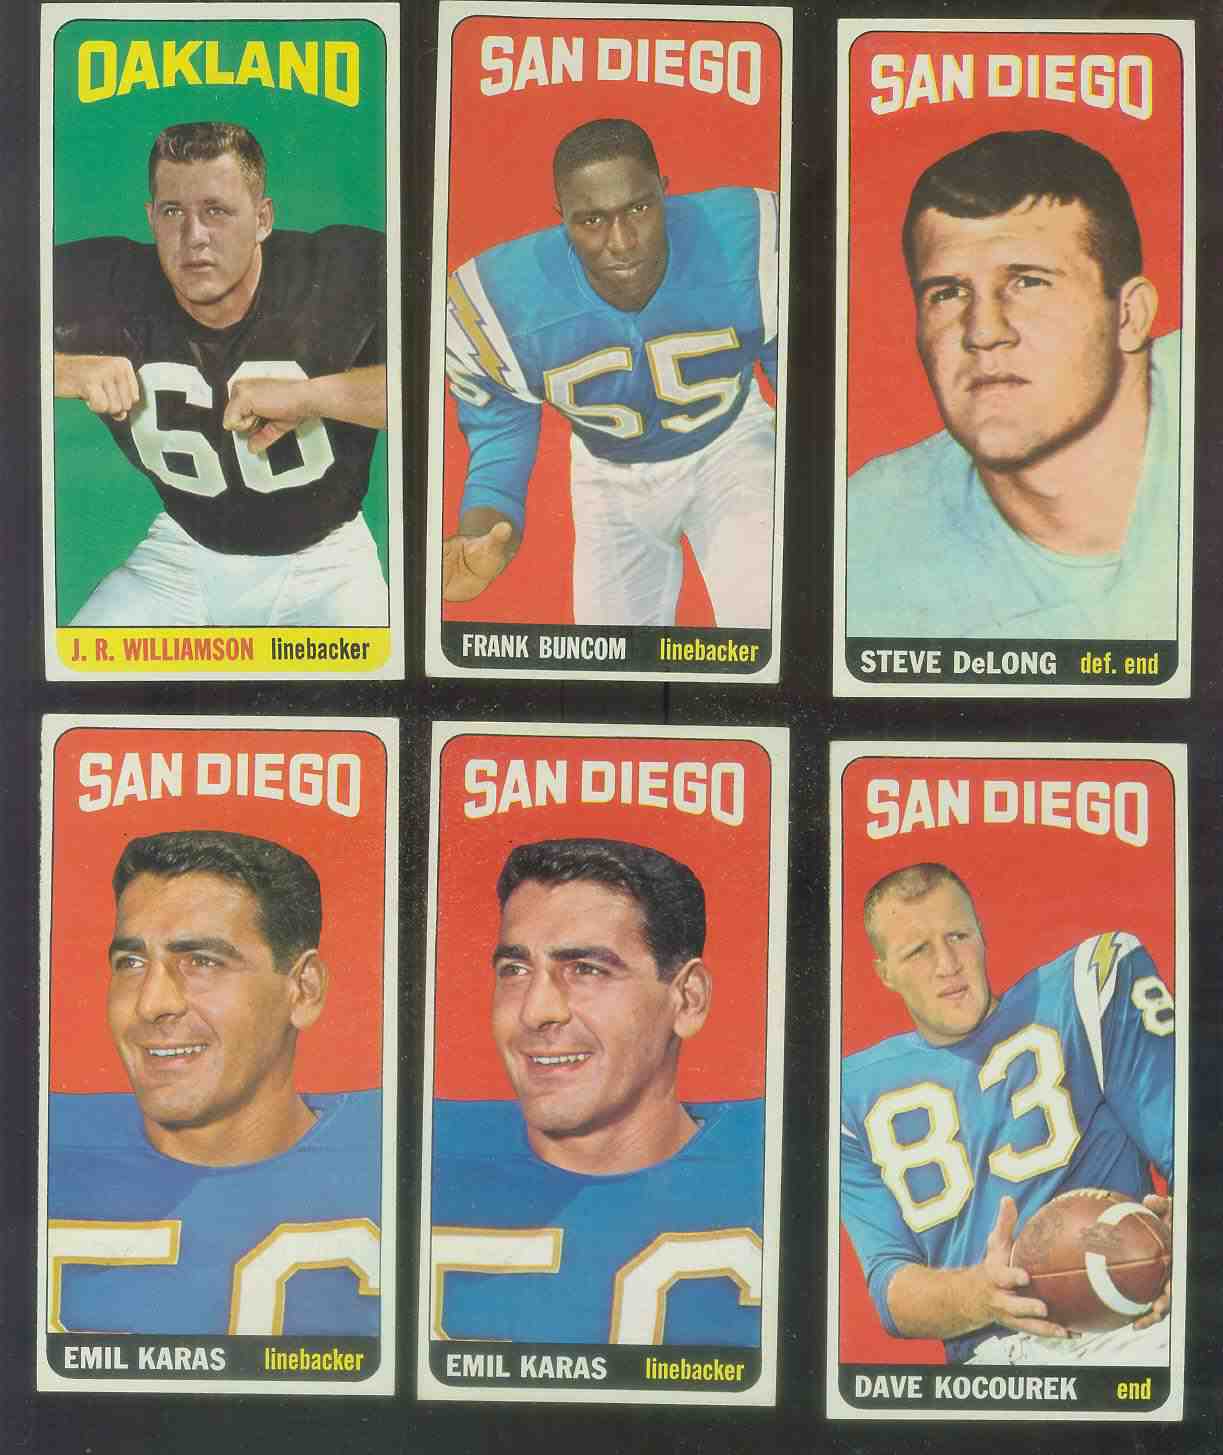 1965 Topps FB #163 Dave Kocourek (San Diego Chargers) Football cards value